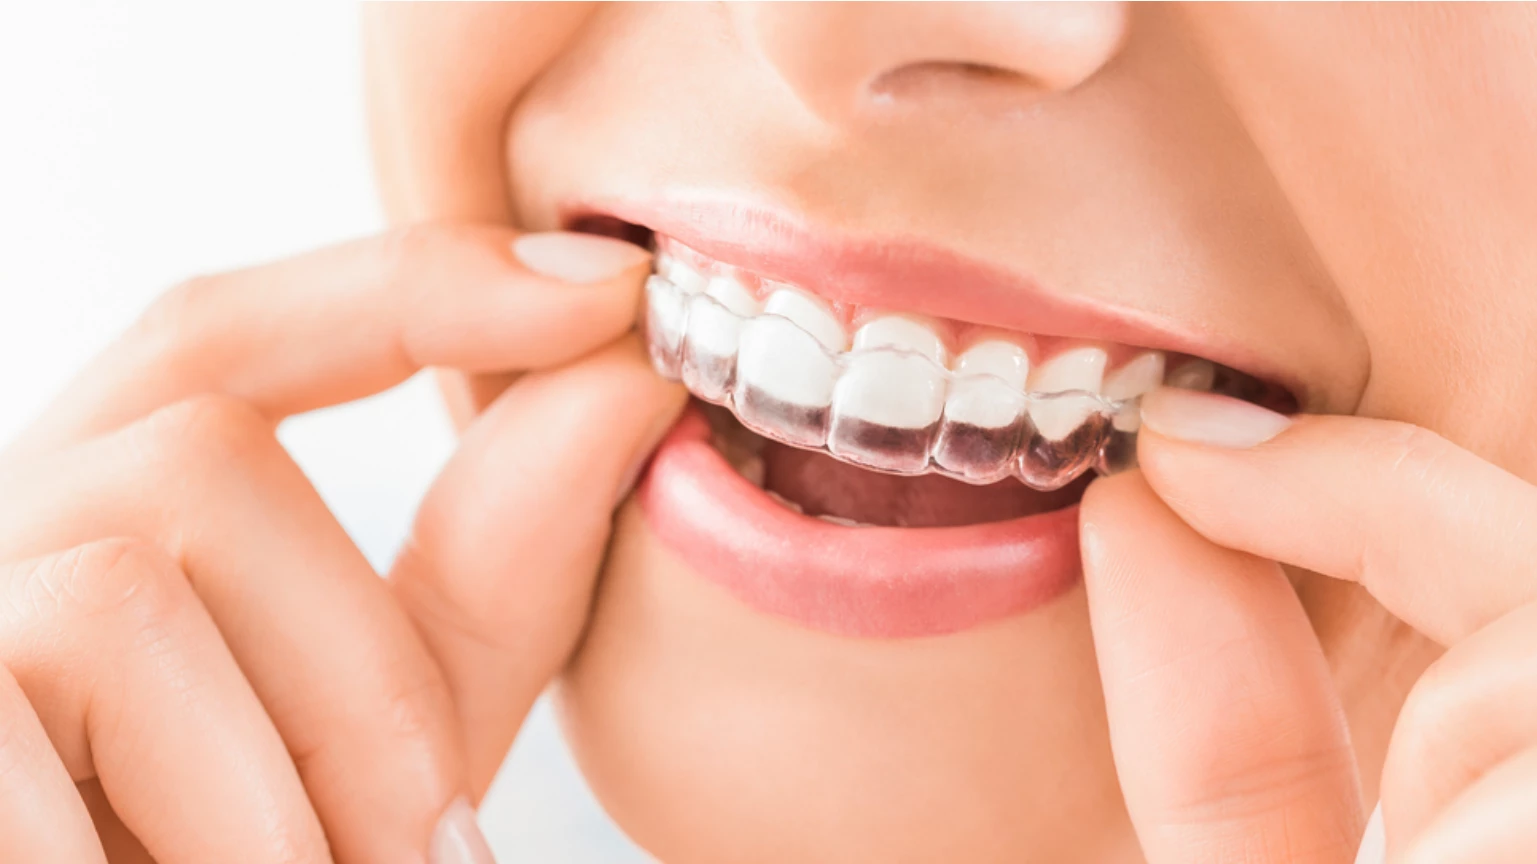 How Long Does a Dental Appointment Typically Last for Invisalign Treatment